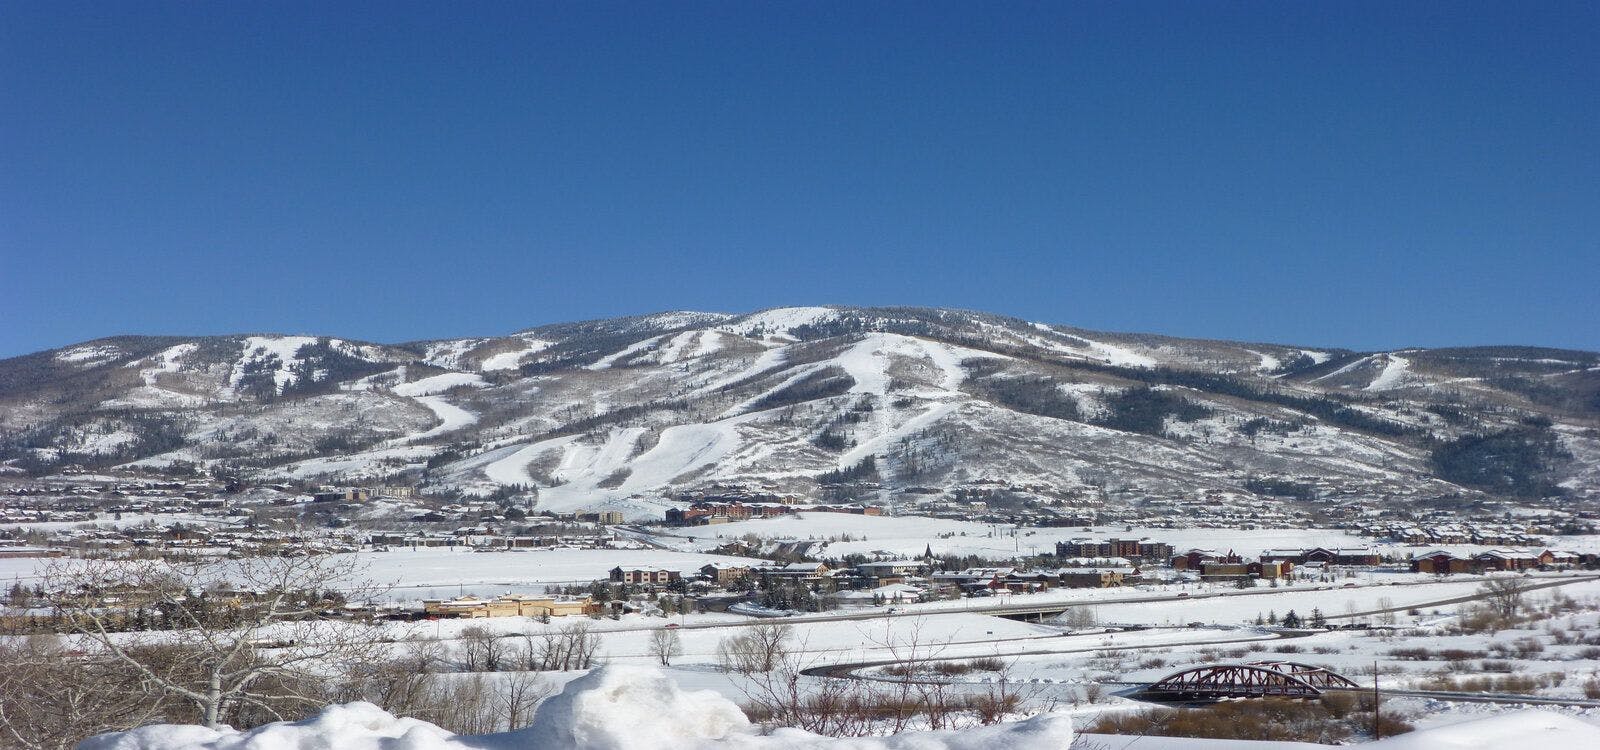 Snowy scenery surrounding vacation homes in Steamboat Springs, CO